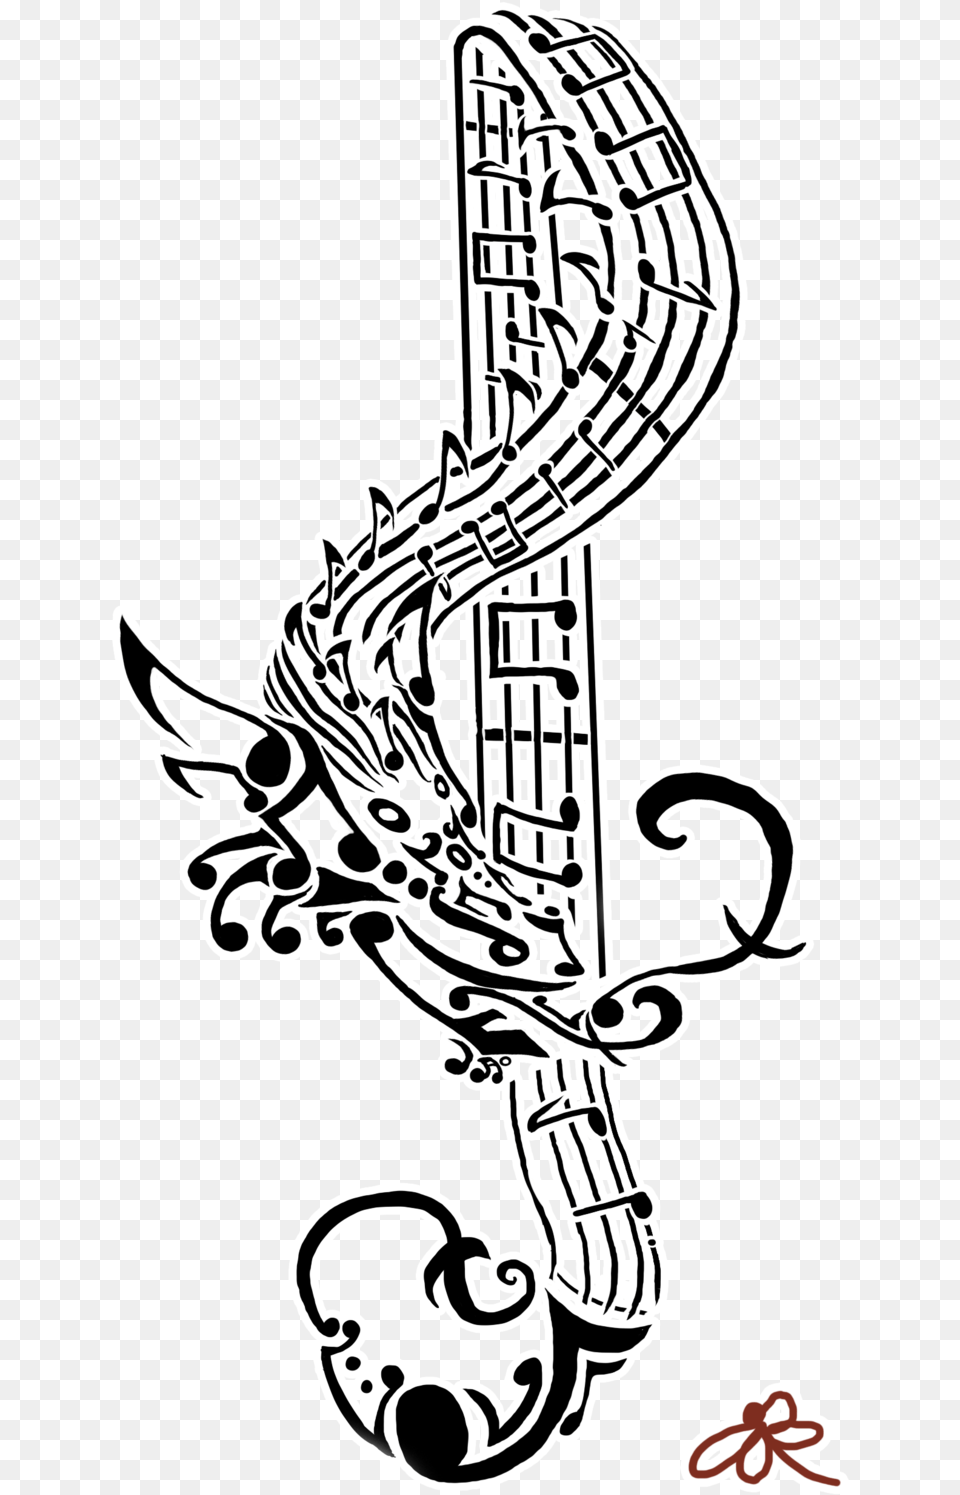 Tattoo Musical Note Art Flash Treble Clef Tribal Music Tattoo Designs, Stencil Free Png Download